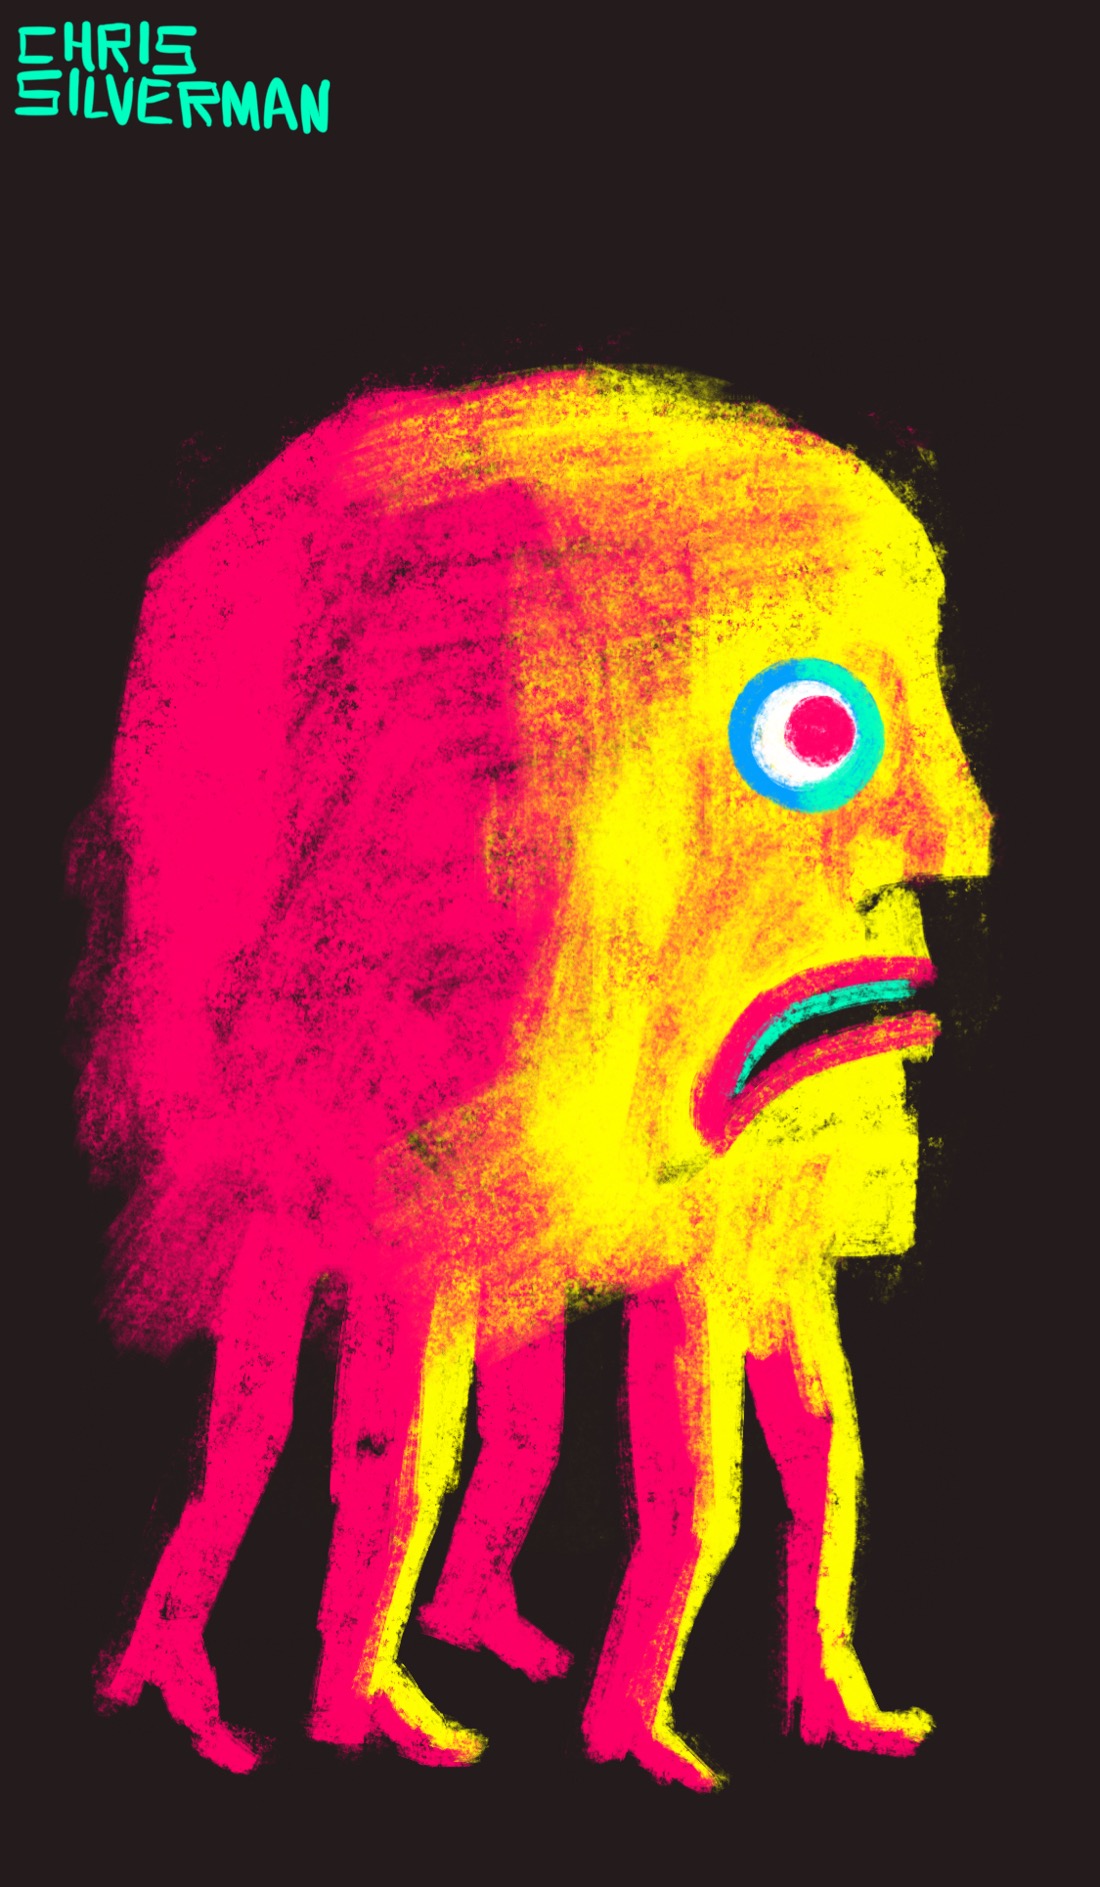 A bizarre, neon-pink figure: a giant head on five legs. The head has a panicked expression. This is a pink and yellow drawing on a black background.